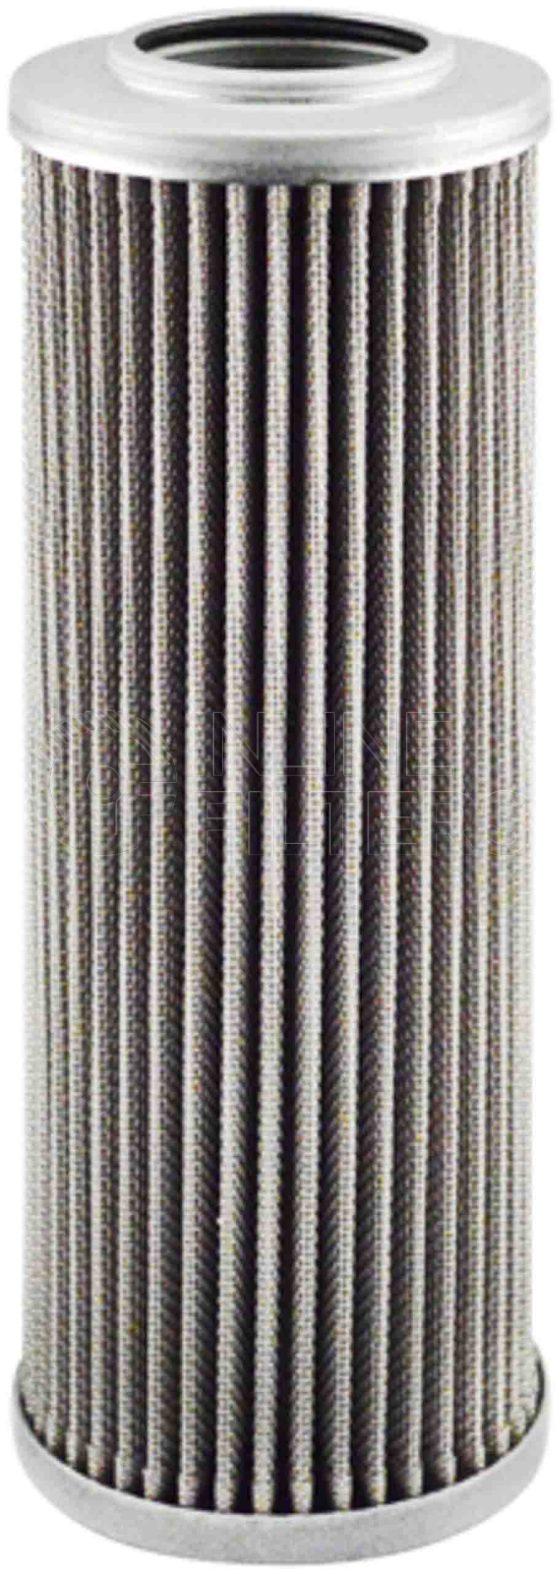 Baldwin PT23025. Baldwin – Hydraulic Filter Elements – PT23025 Baldwin hydraulic elements offer superior protection for your engine-powered equipment. Compatible Competitor Part Number Eppensteiner 2225G25A000P; Filtrec DVD2225B25B Product Type Hydraulic Element Application Eppensteiner Applications Outside Diameter 2 7/8 (73.0) Inside Diameter 1 9/16 (39.7) One End Length 8 13/16 (223.8) Brand Baldwin Division Engine Mobile Aftermarket Industry […]